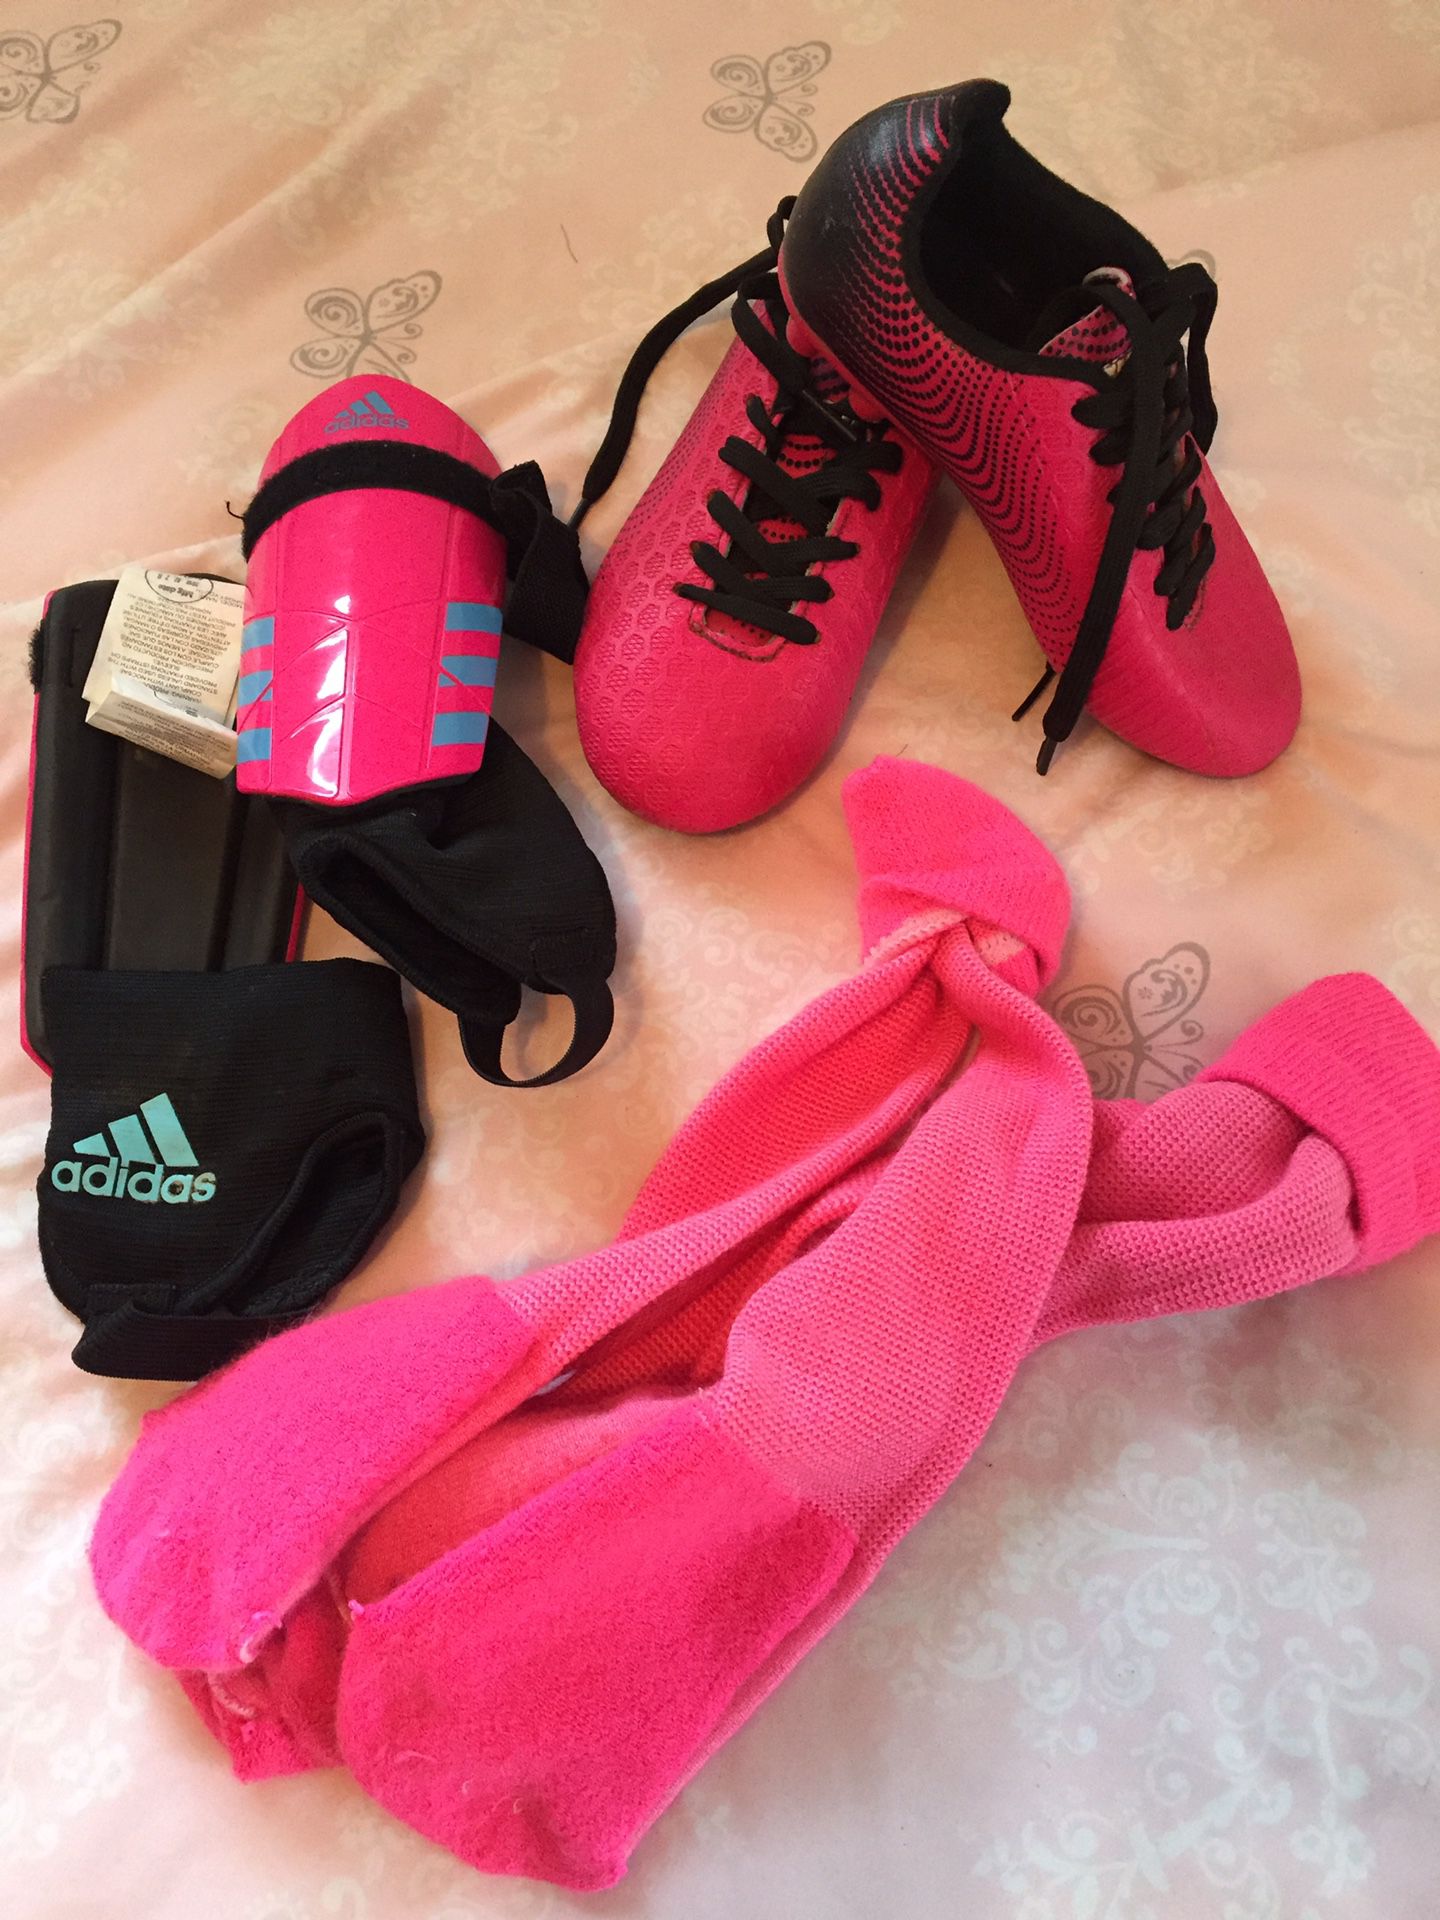 Pink soccer cleats size 10 girls, shin guards and socks